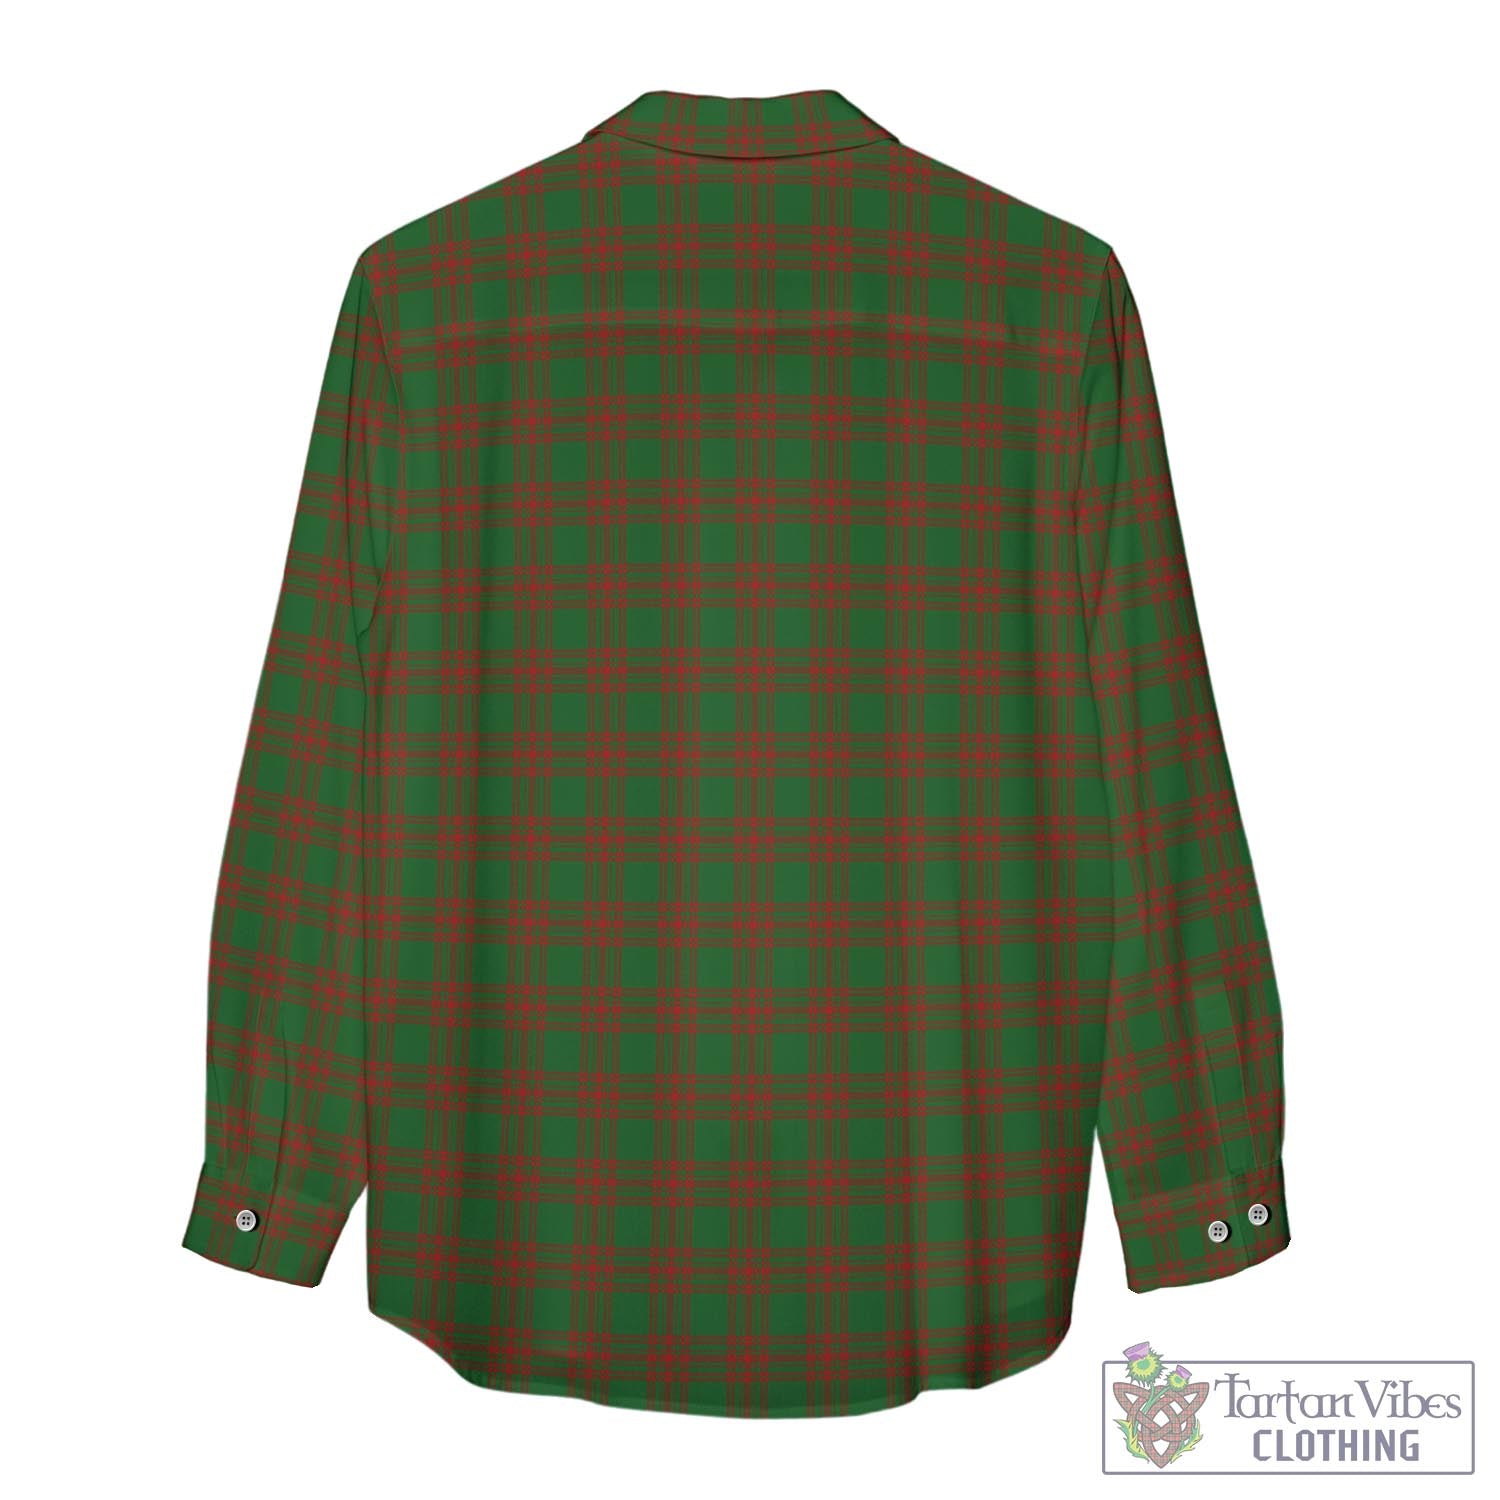 Tartan Vibes Clothing Menzies Tartan Womens Casual Shirt with Family Crest